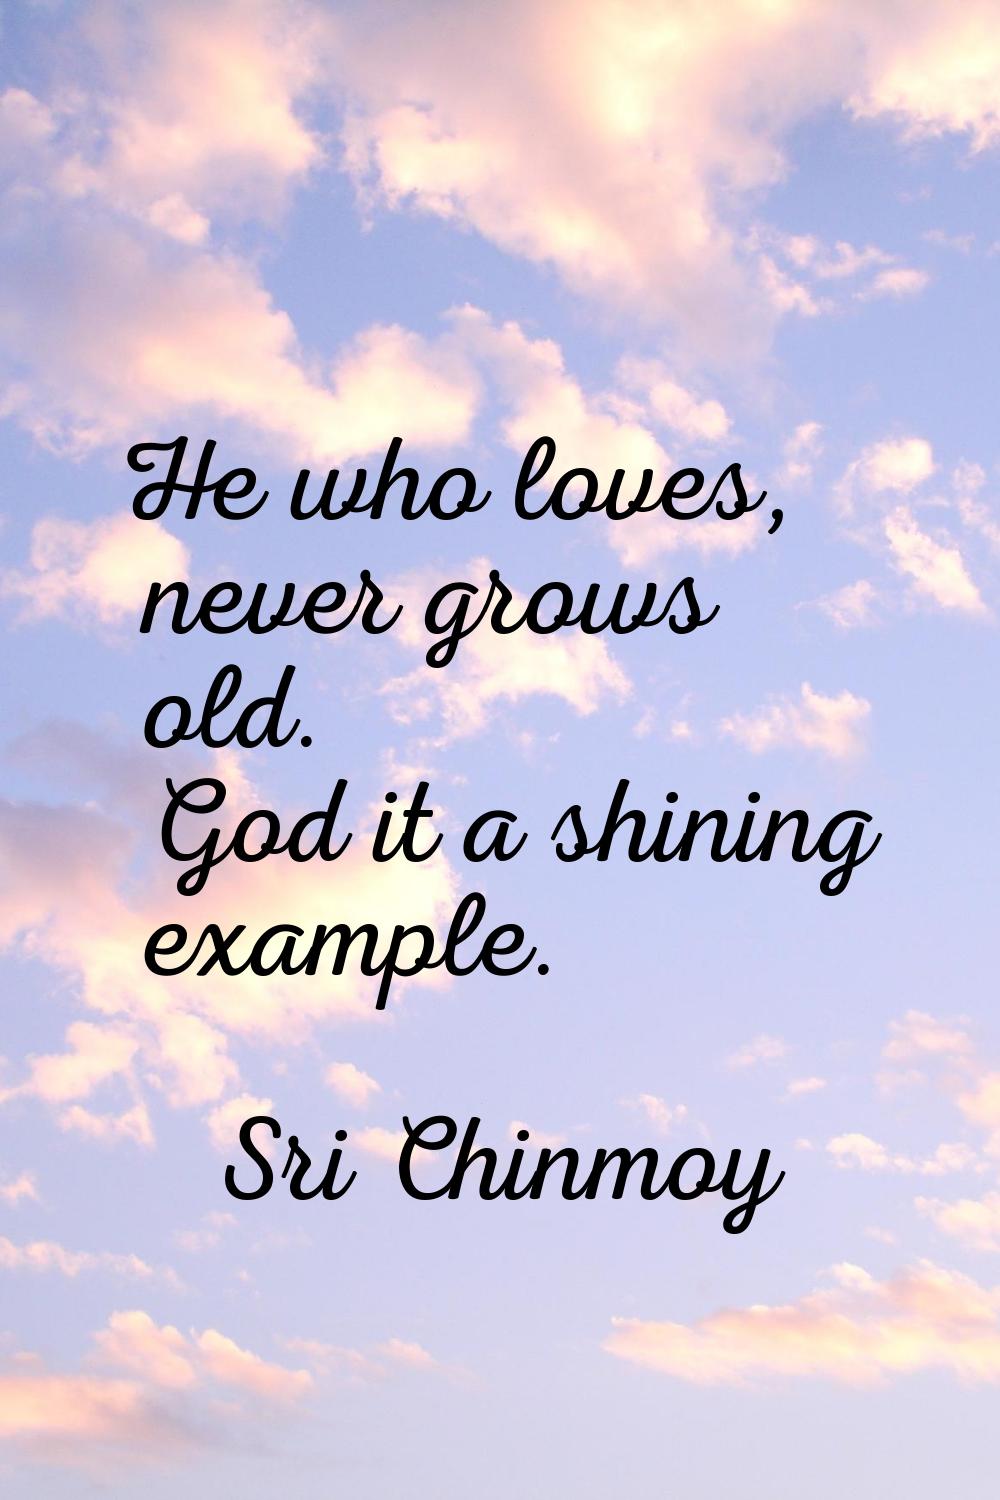 He who loves, never grows old. God it a shining example.